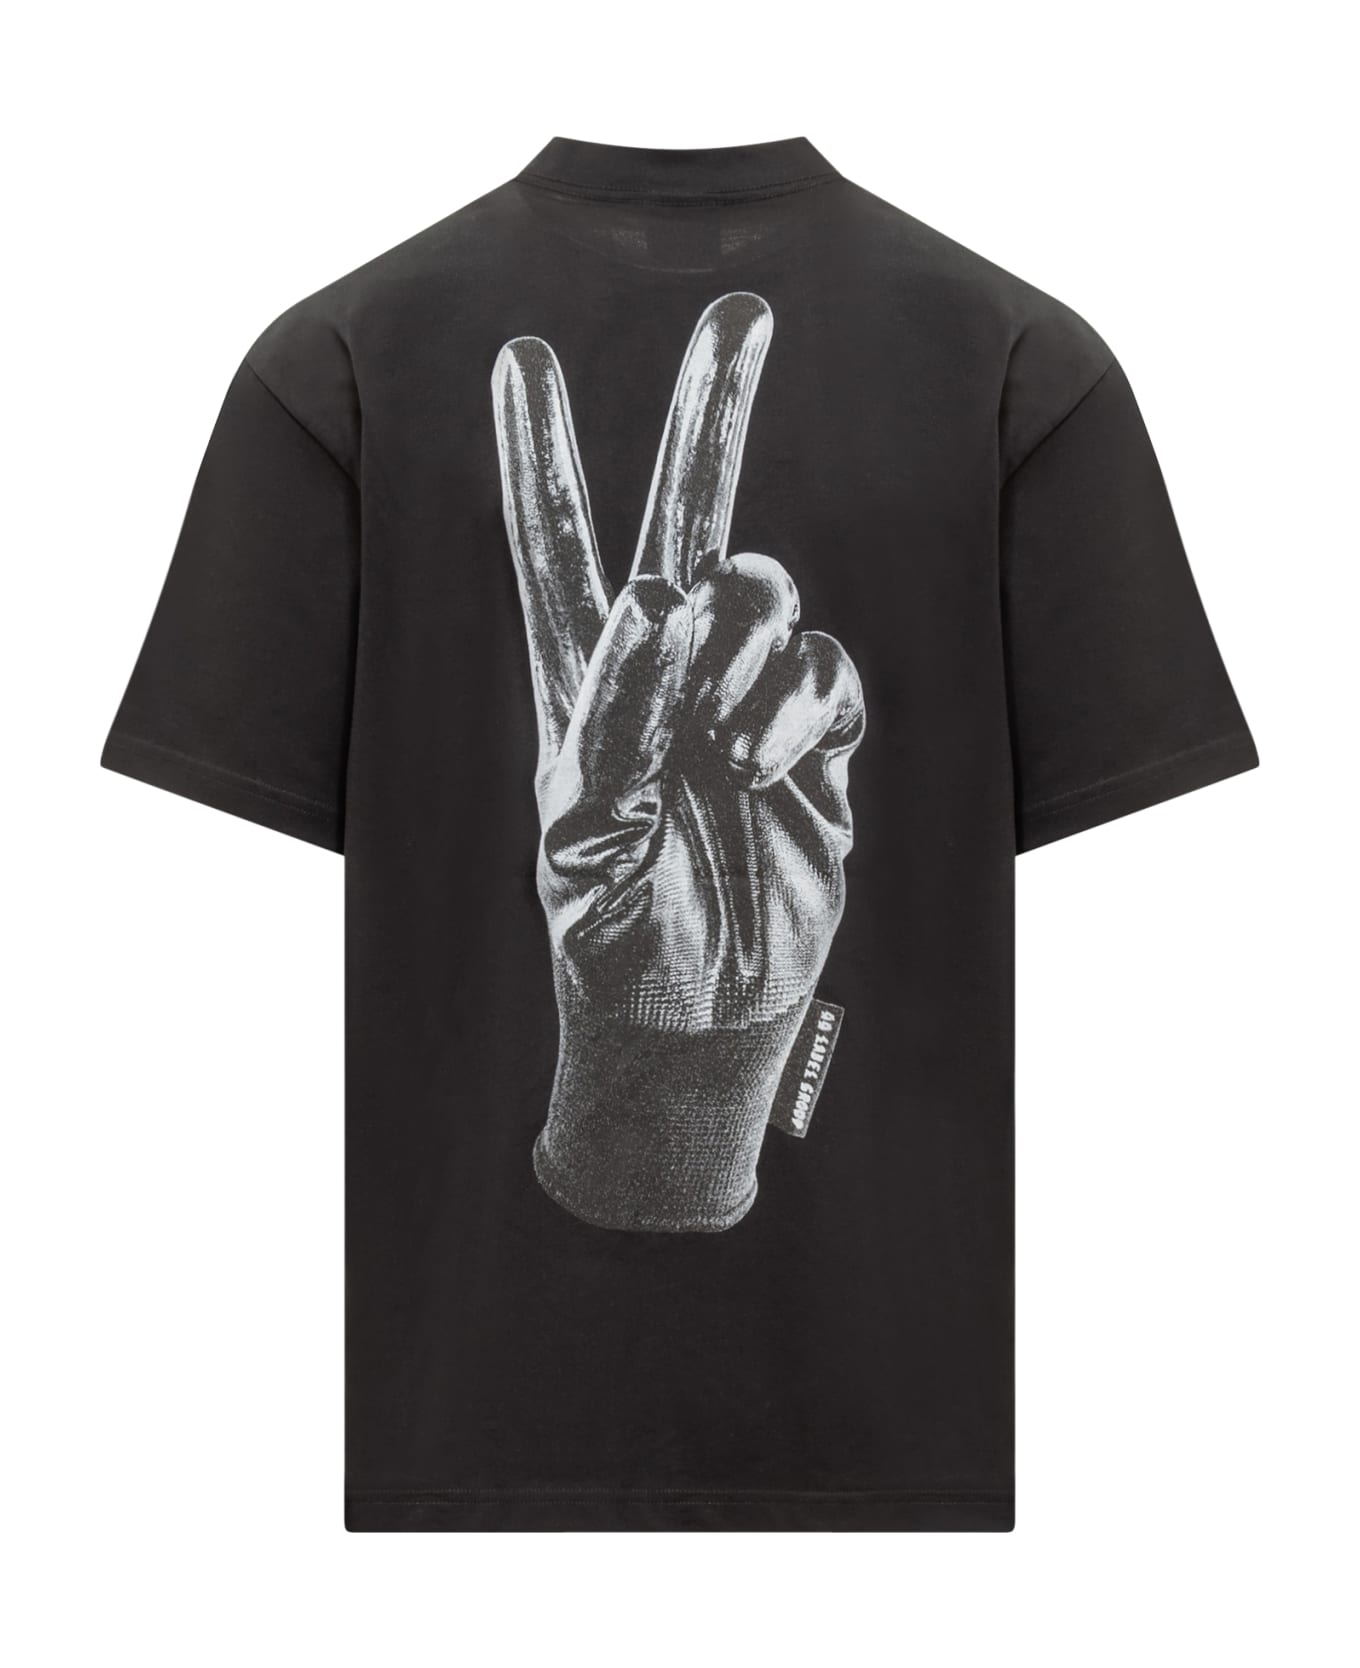 44 Label Group T-shirt With Peace Print - BLACK-TEACH PEACE PRINT シャツ